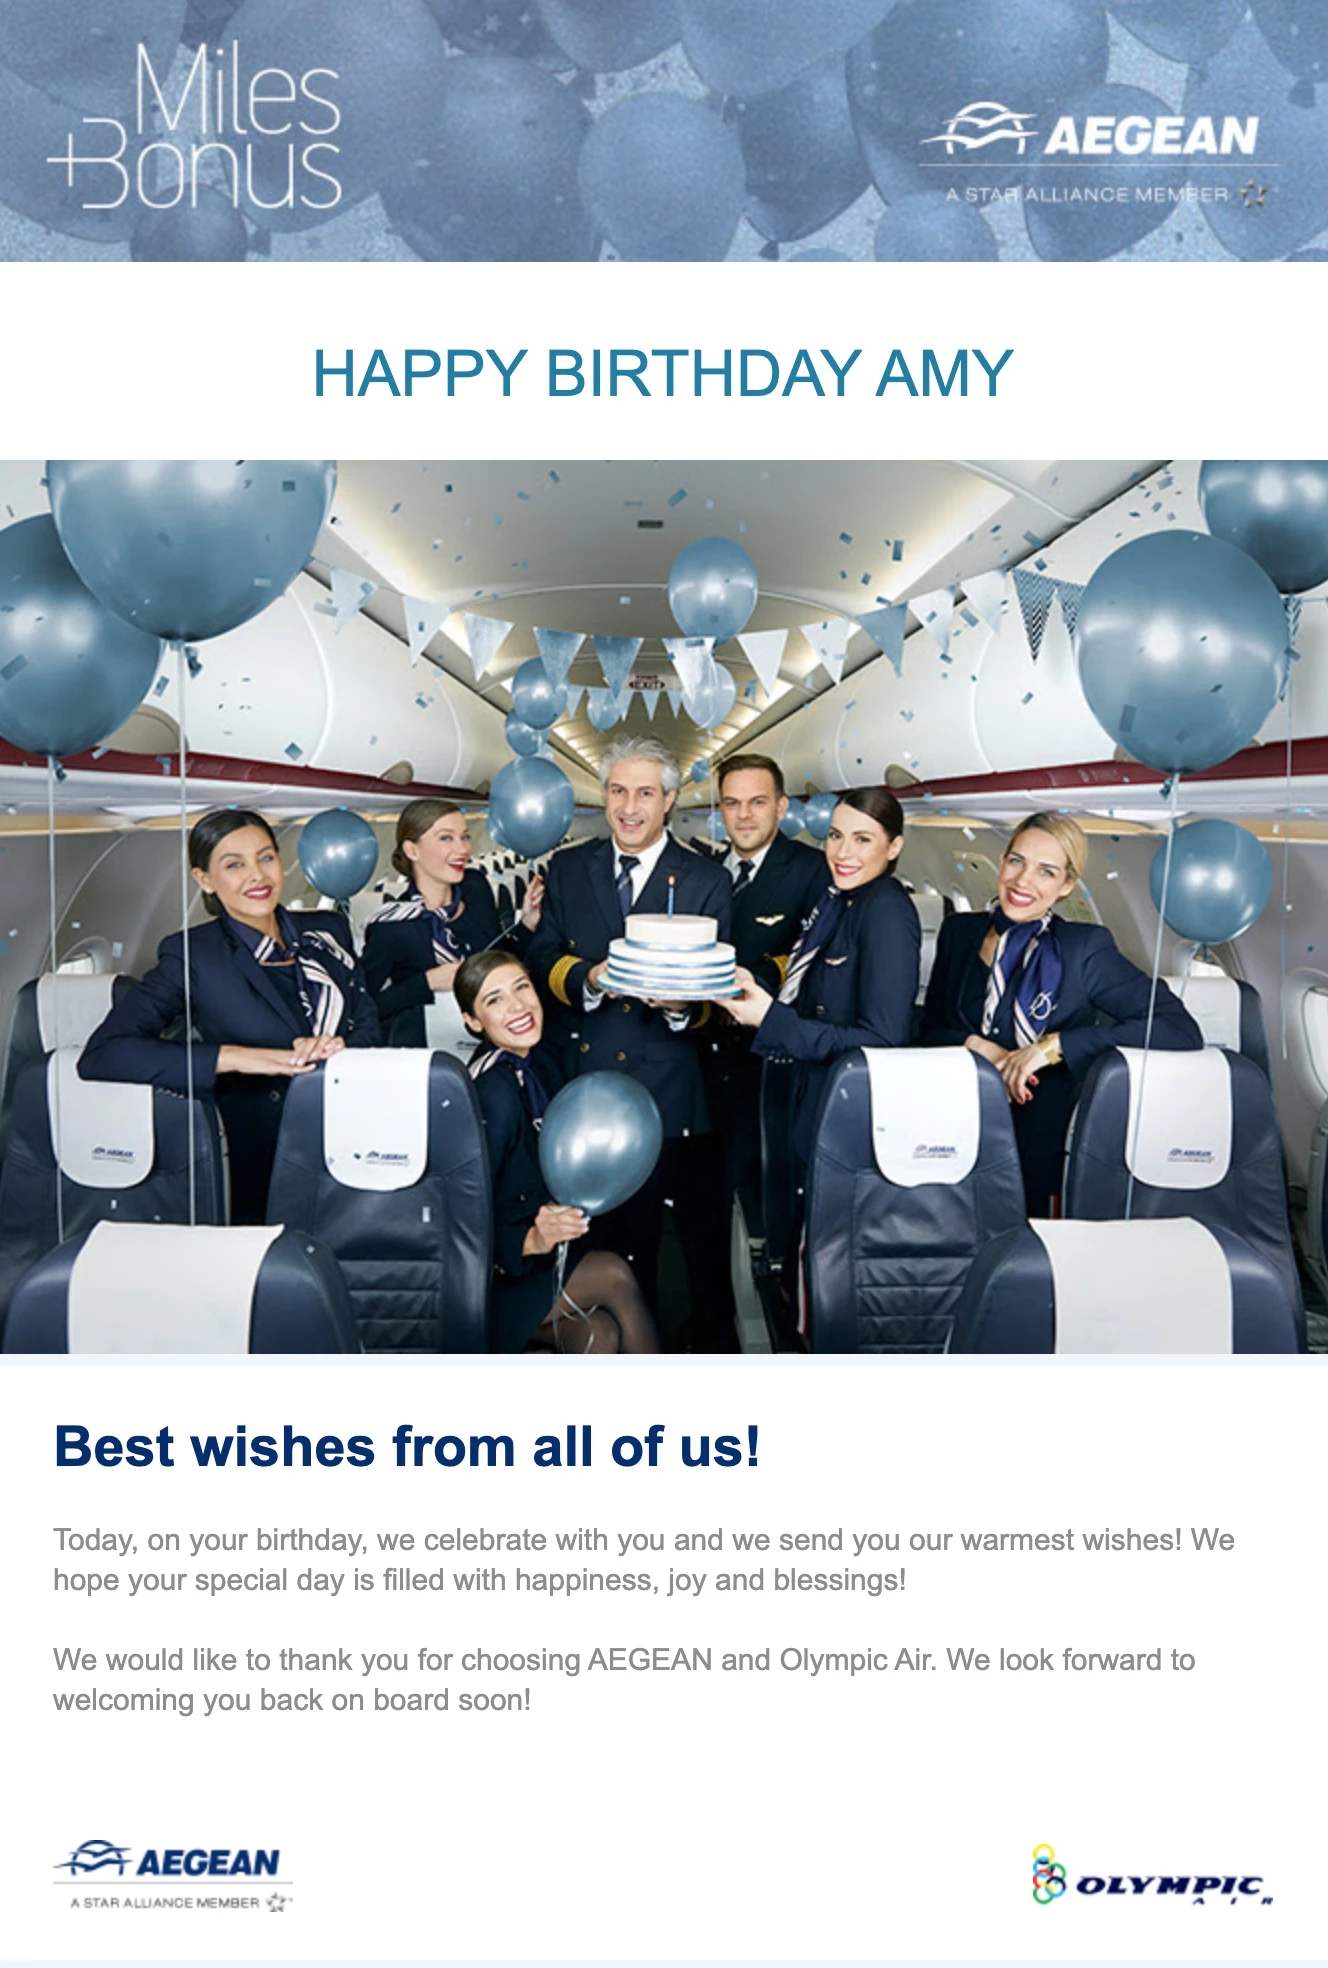 Aegean airlines happy birthday email with photo of crew